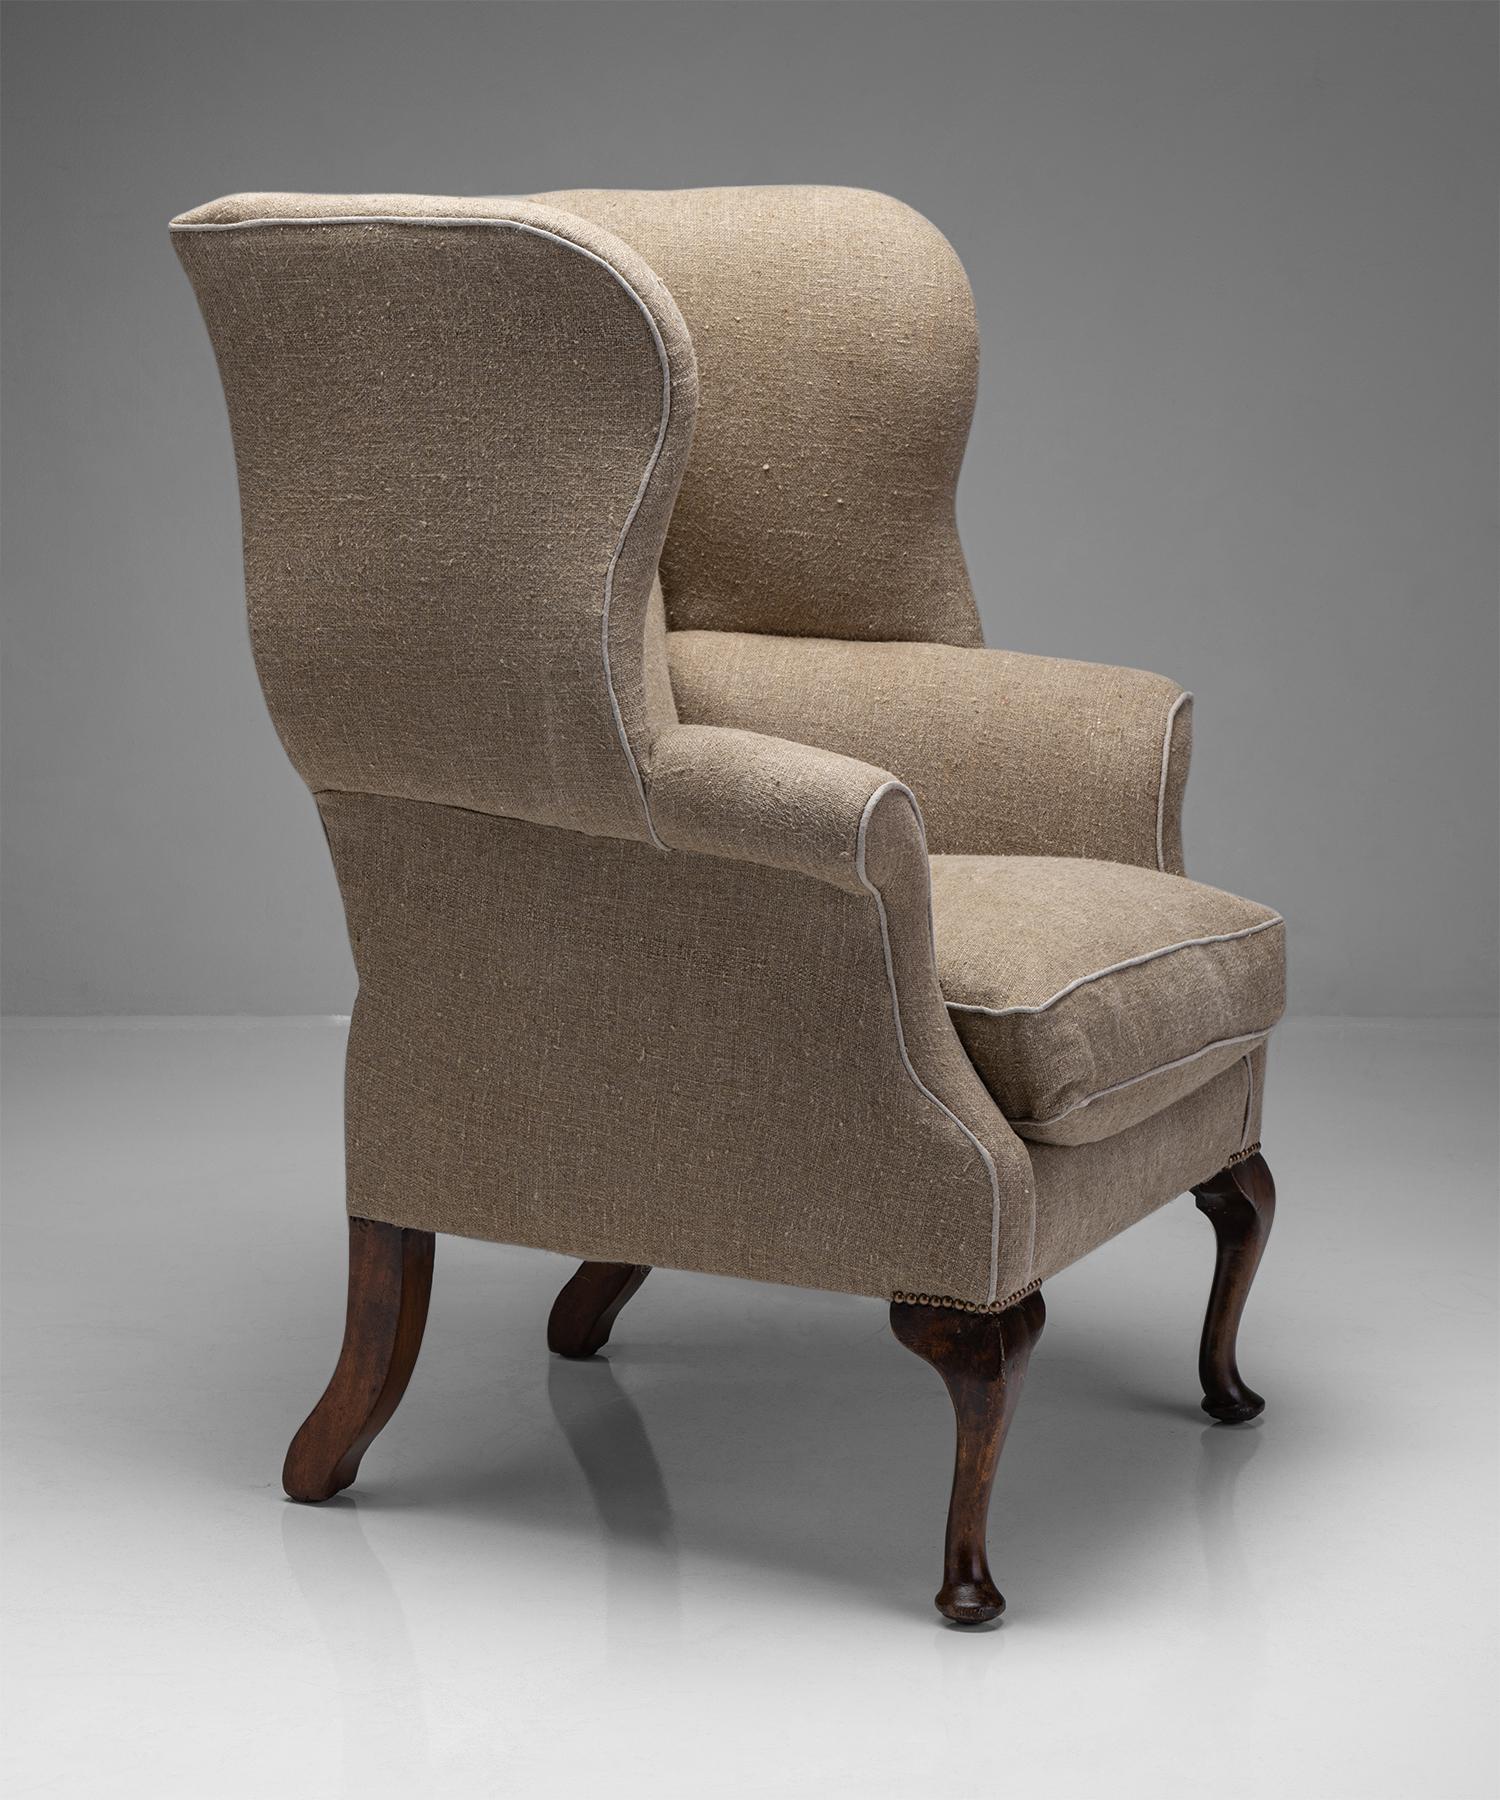 Country House Wingback armchair

England, Circa 1870

Elegant armchair newly upholstered in Irish linen.